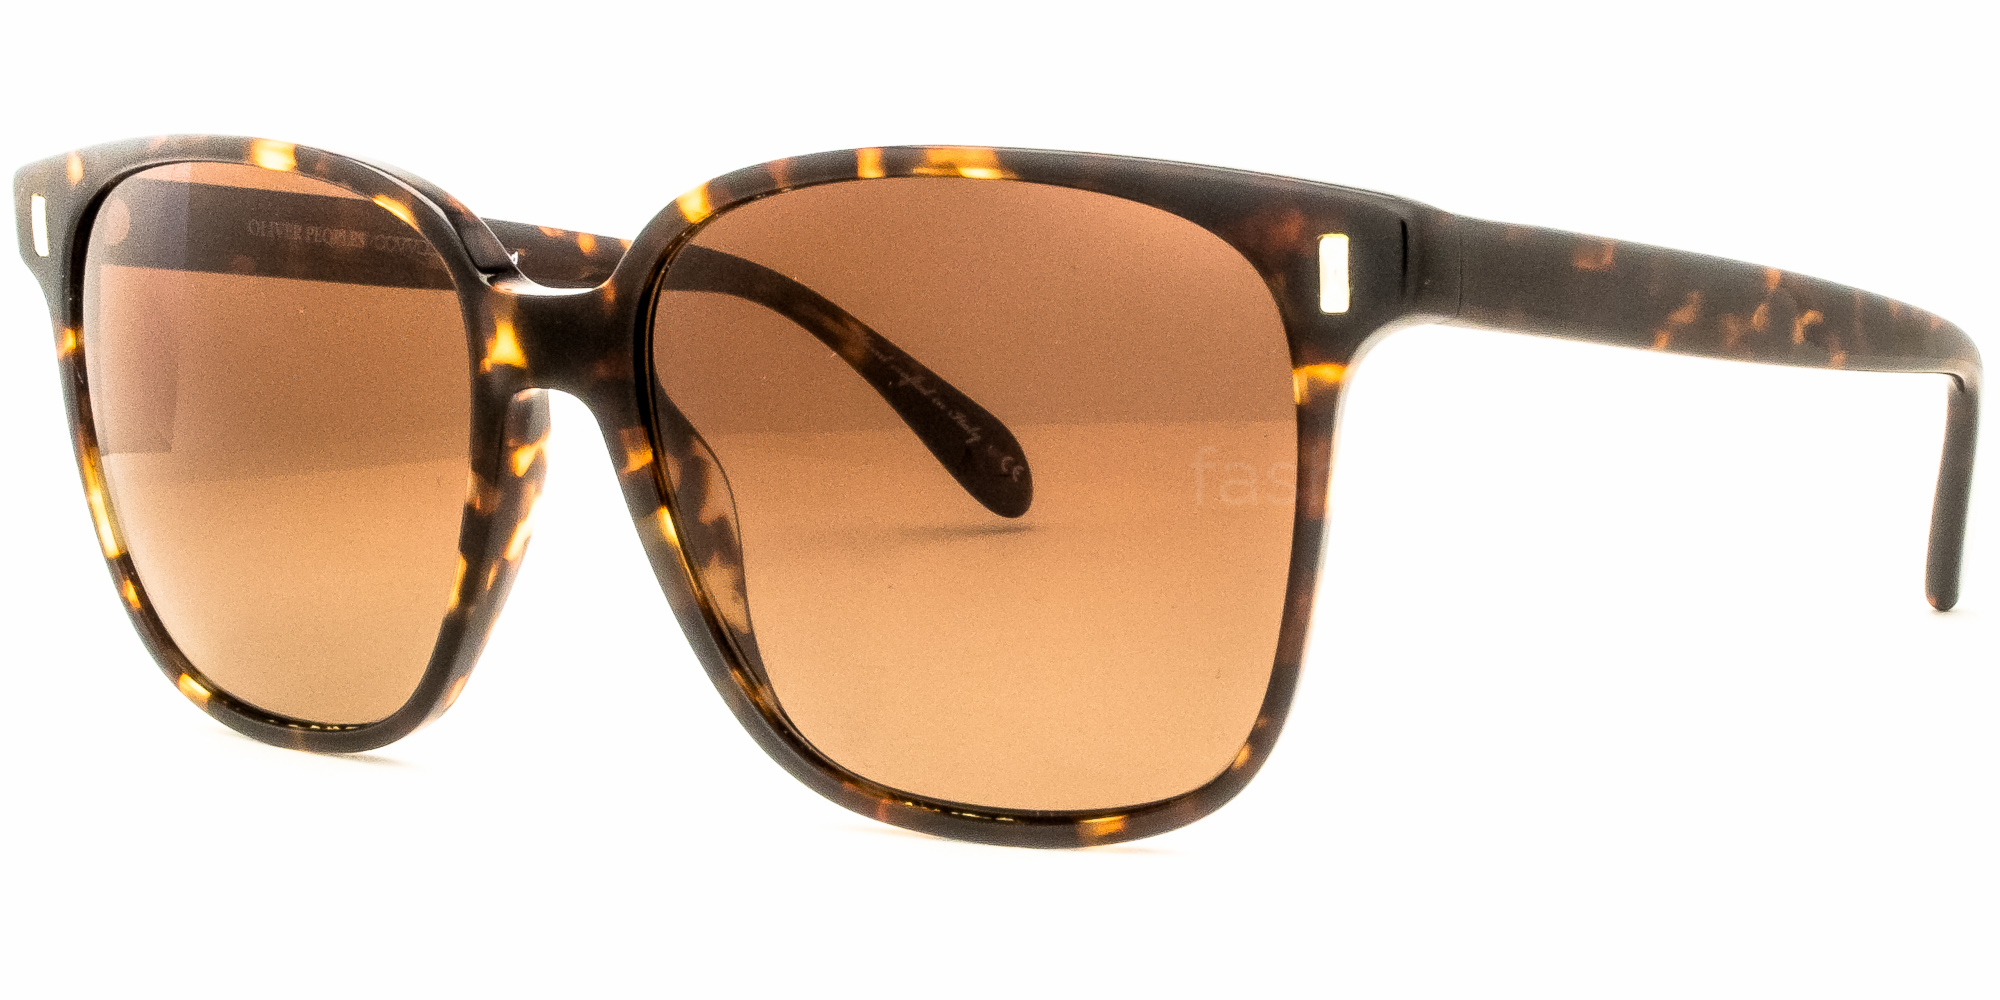 OLIVER PEOPLES MARMONT 1415T5